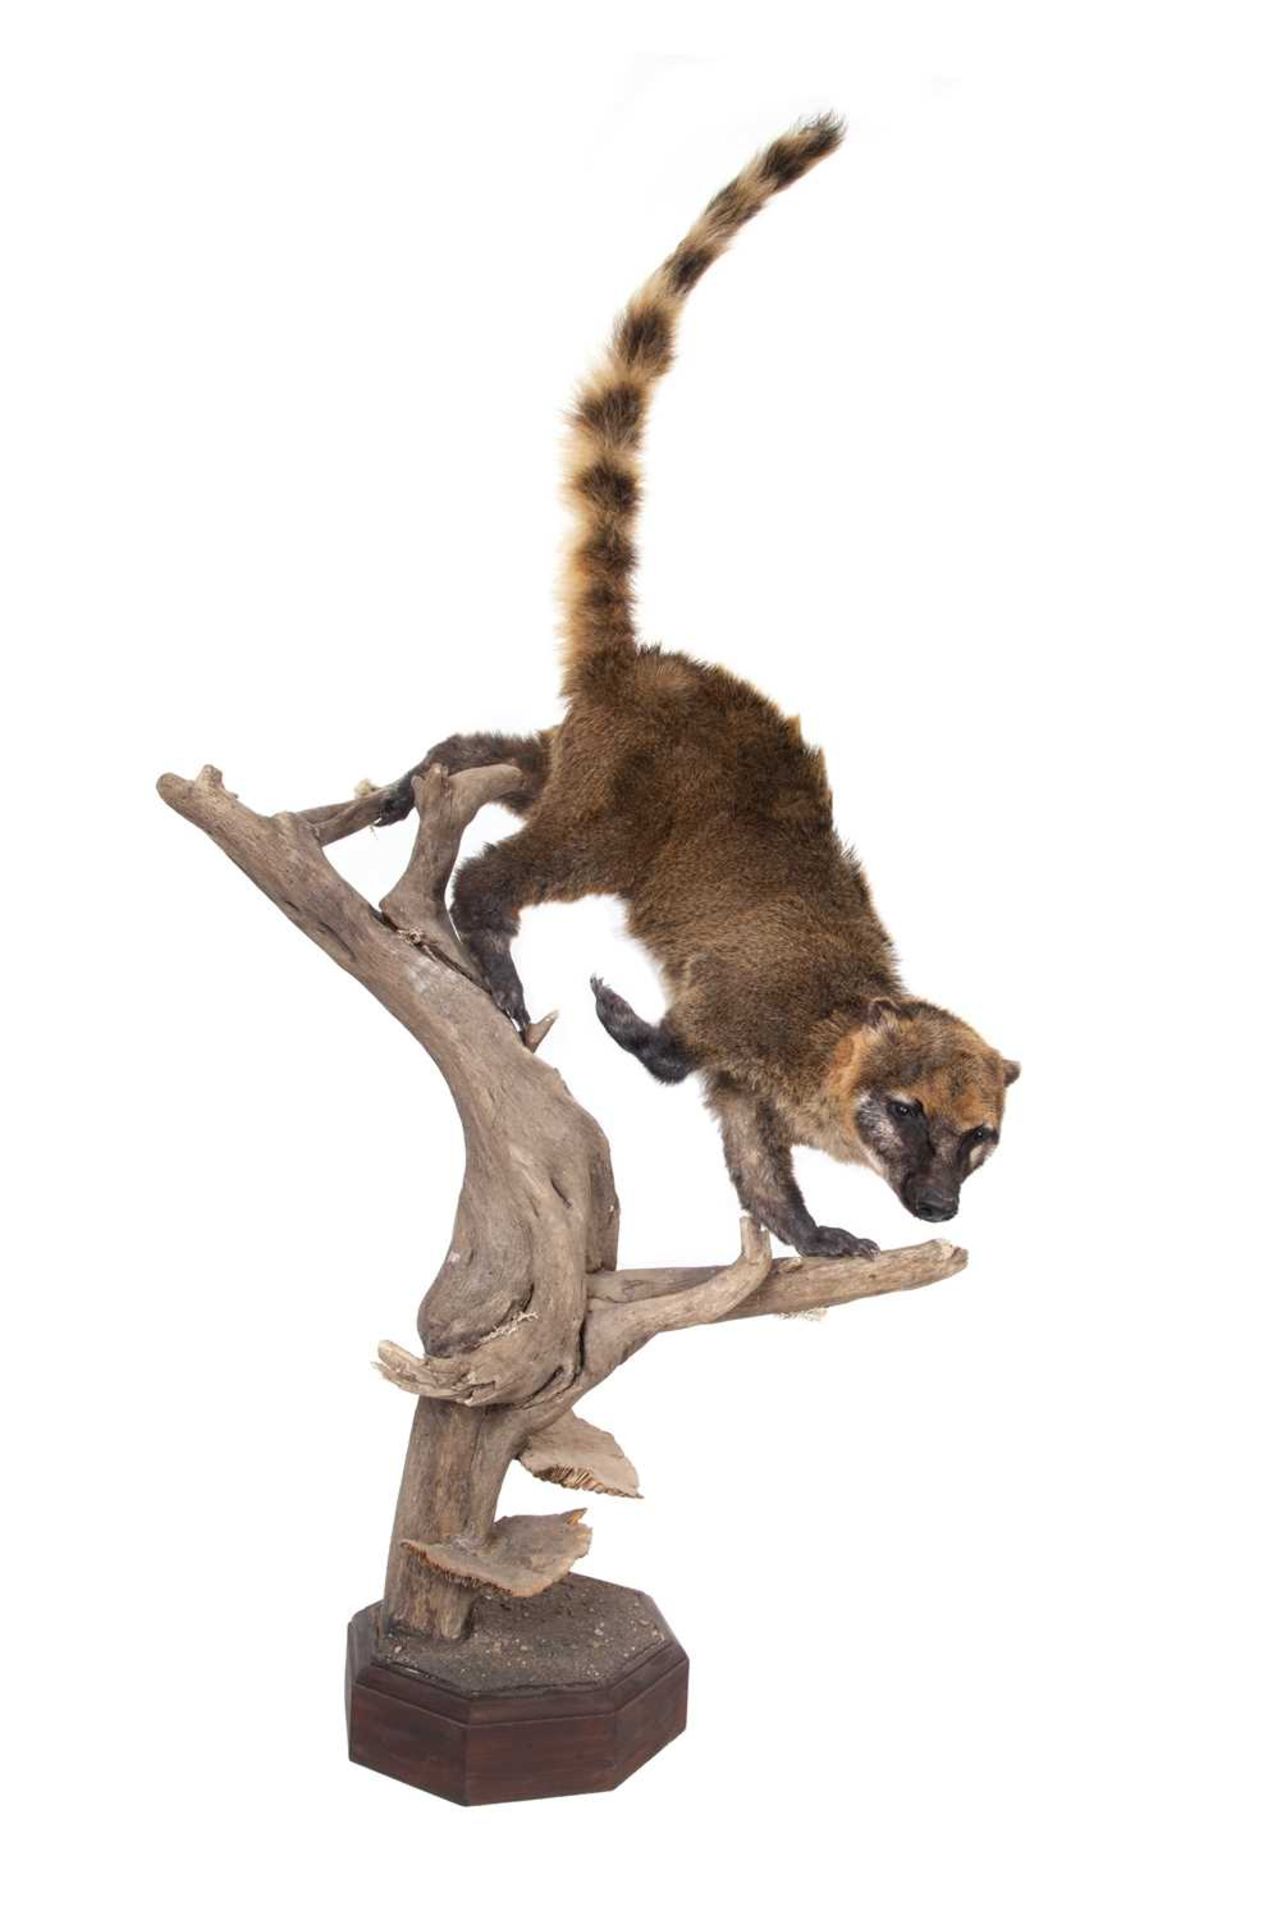 A TAXIDERMY FULL MOUNT STUDY OF A COATI - Image 2 of 3